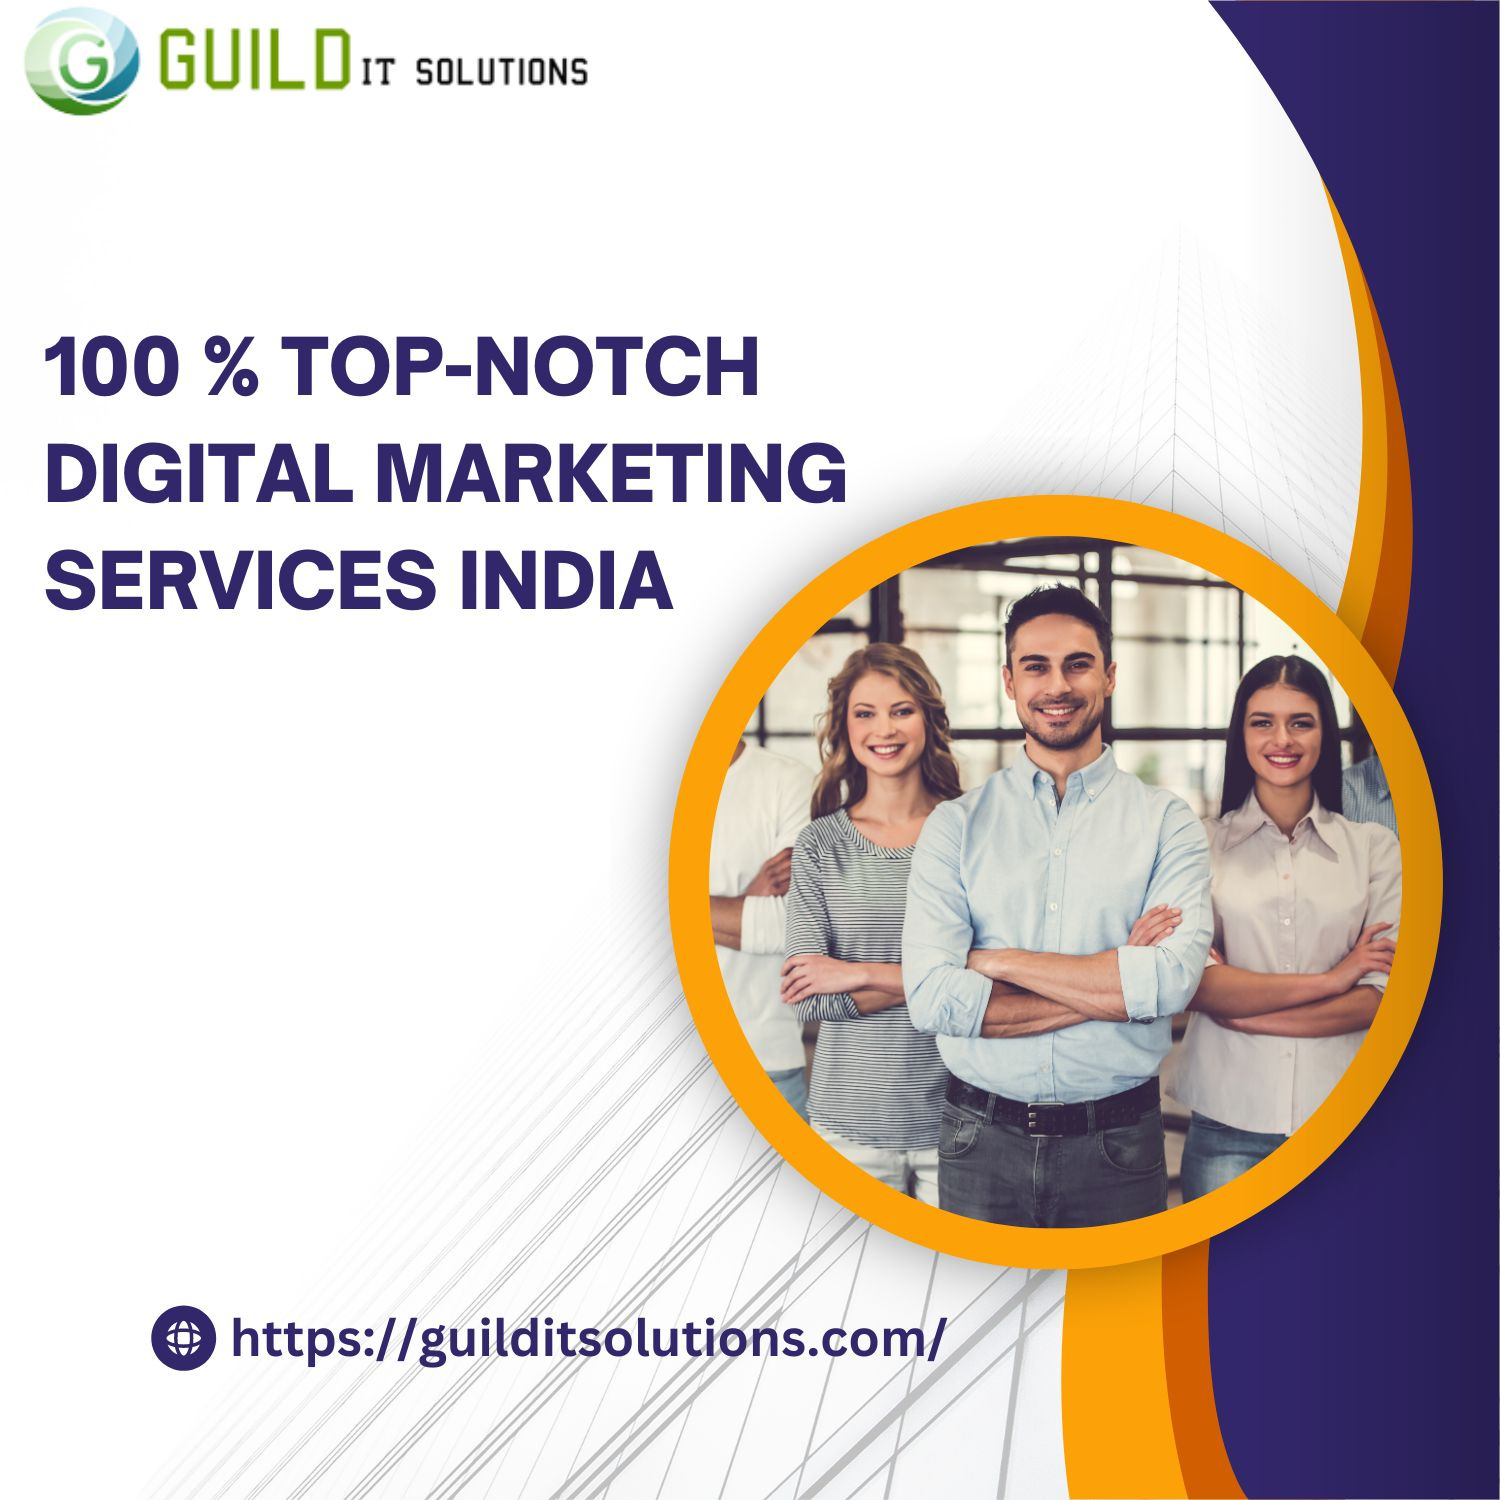 Digital Marketing Services In India Helps Building Brands by Guild IT ...